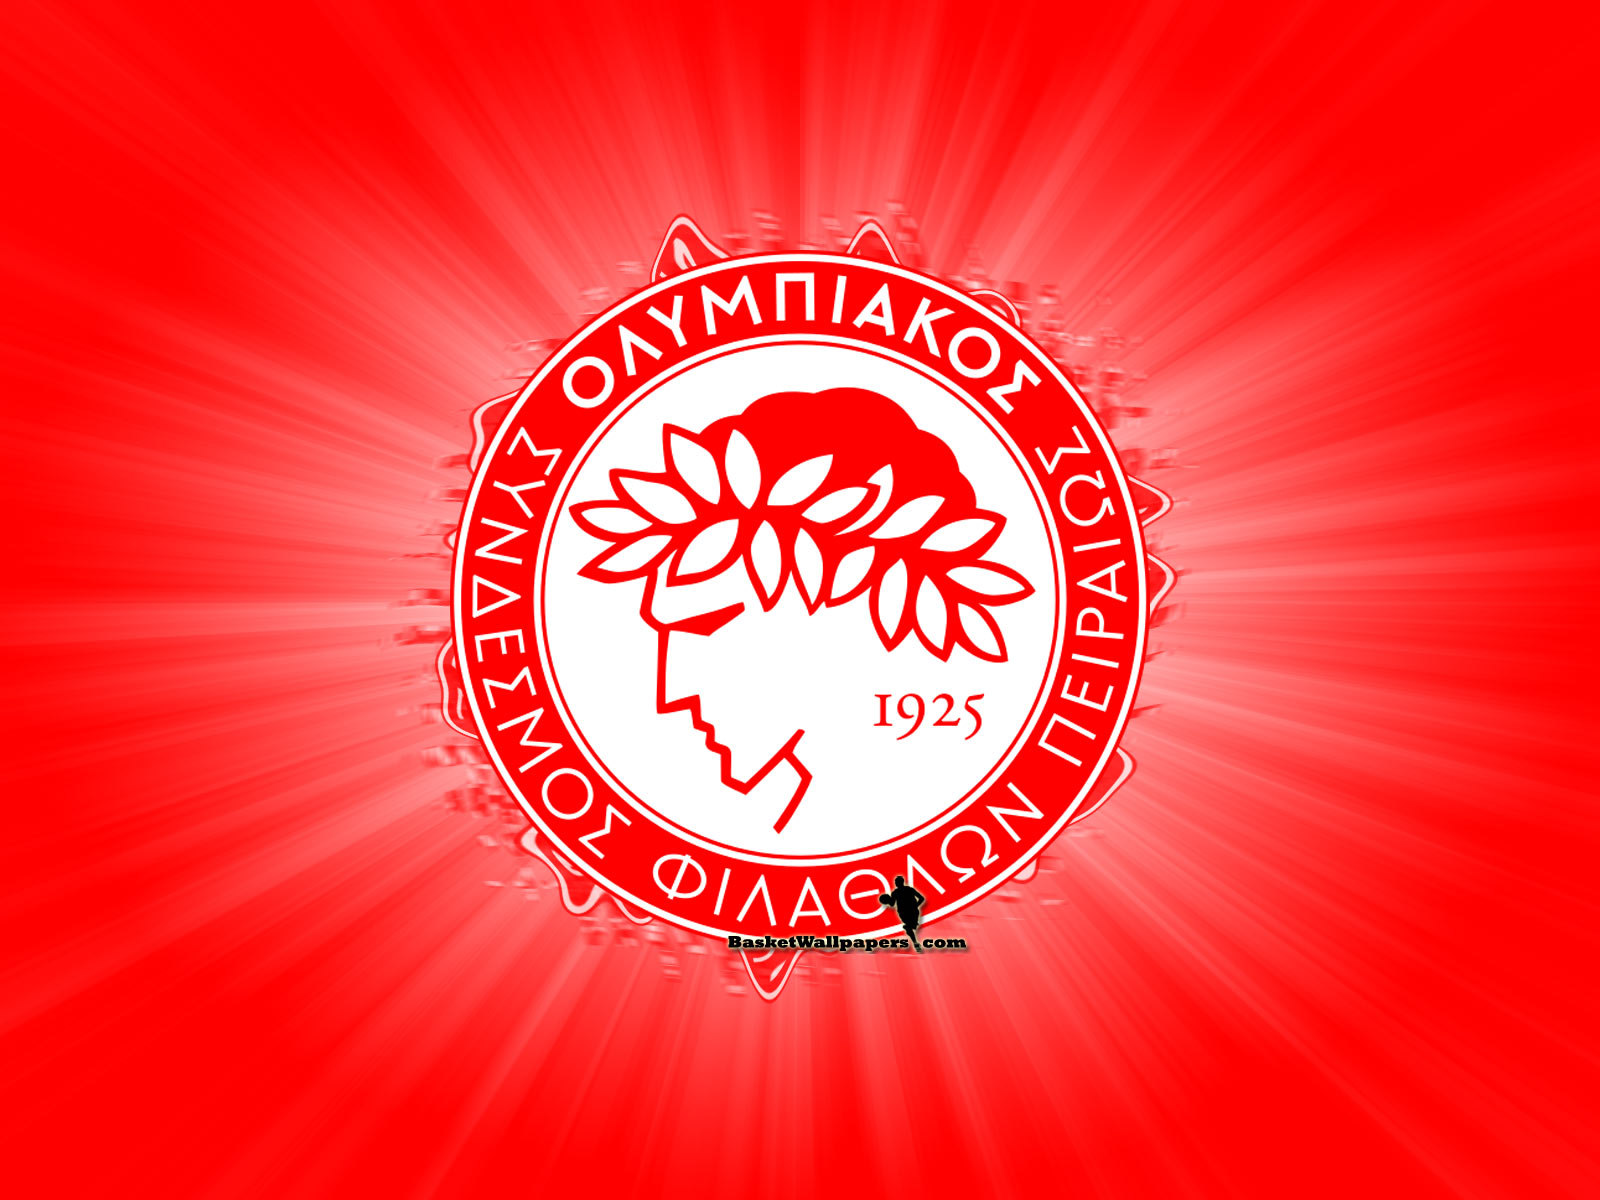 olympiakos wallpaper android olympiakos wallpaper android 320x480 ...